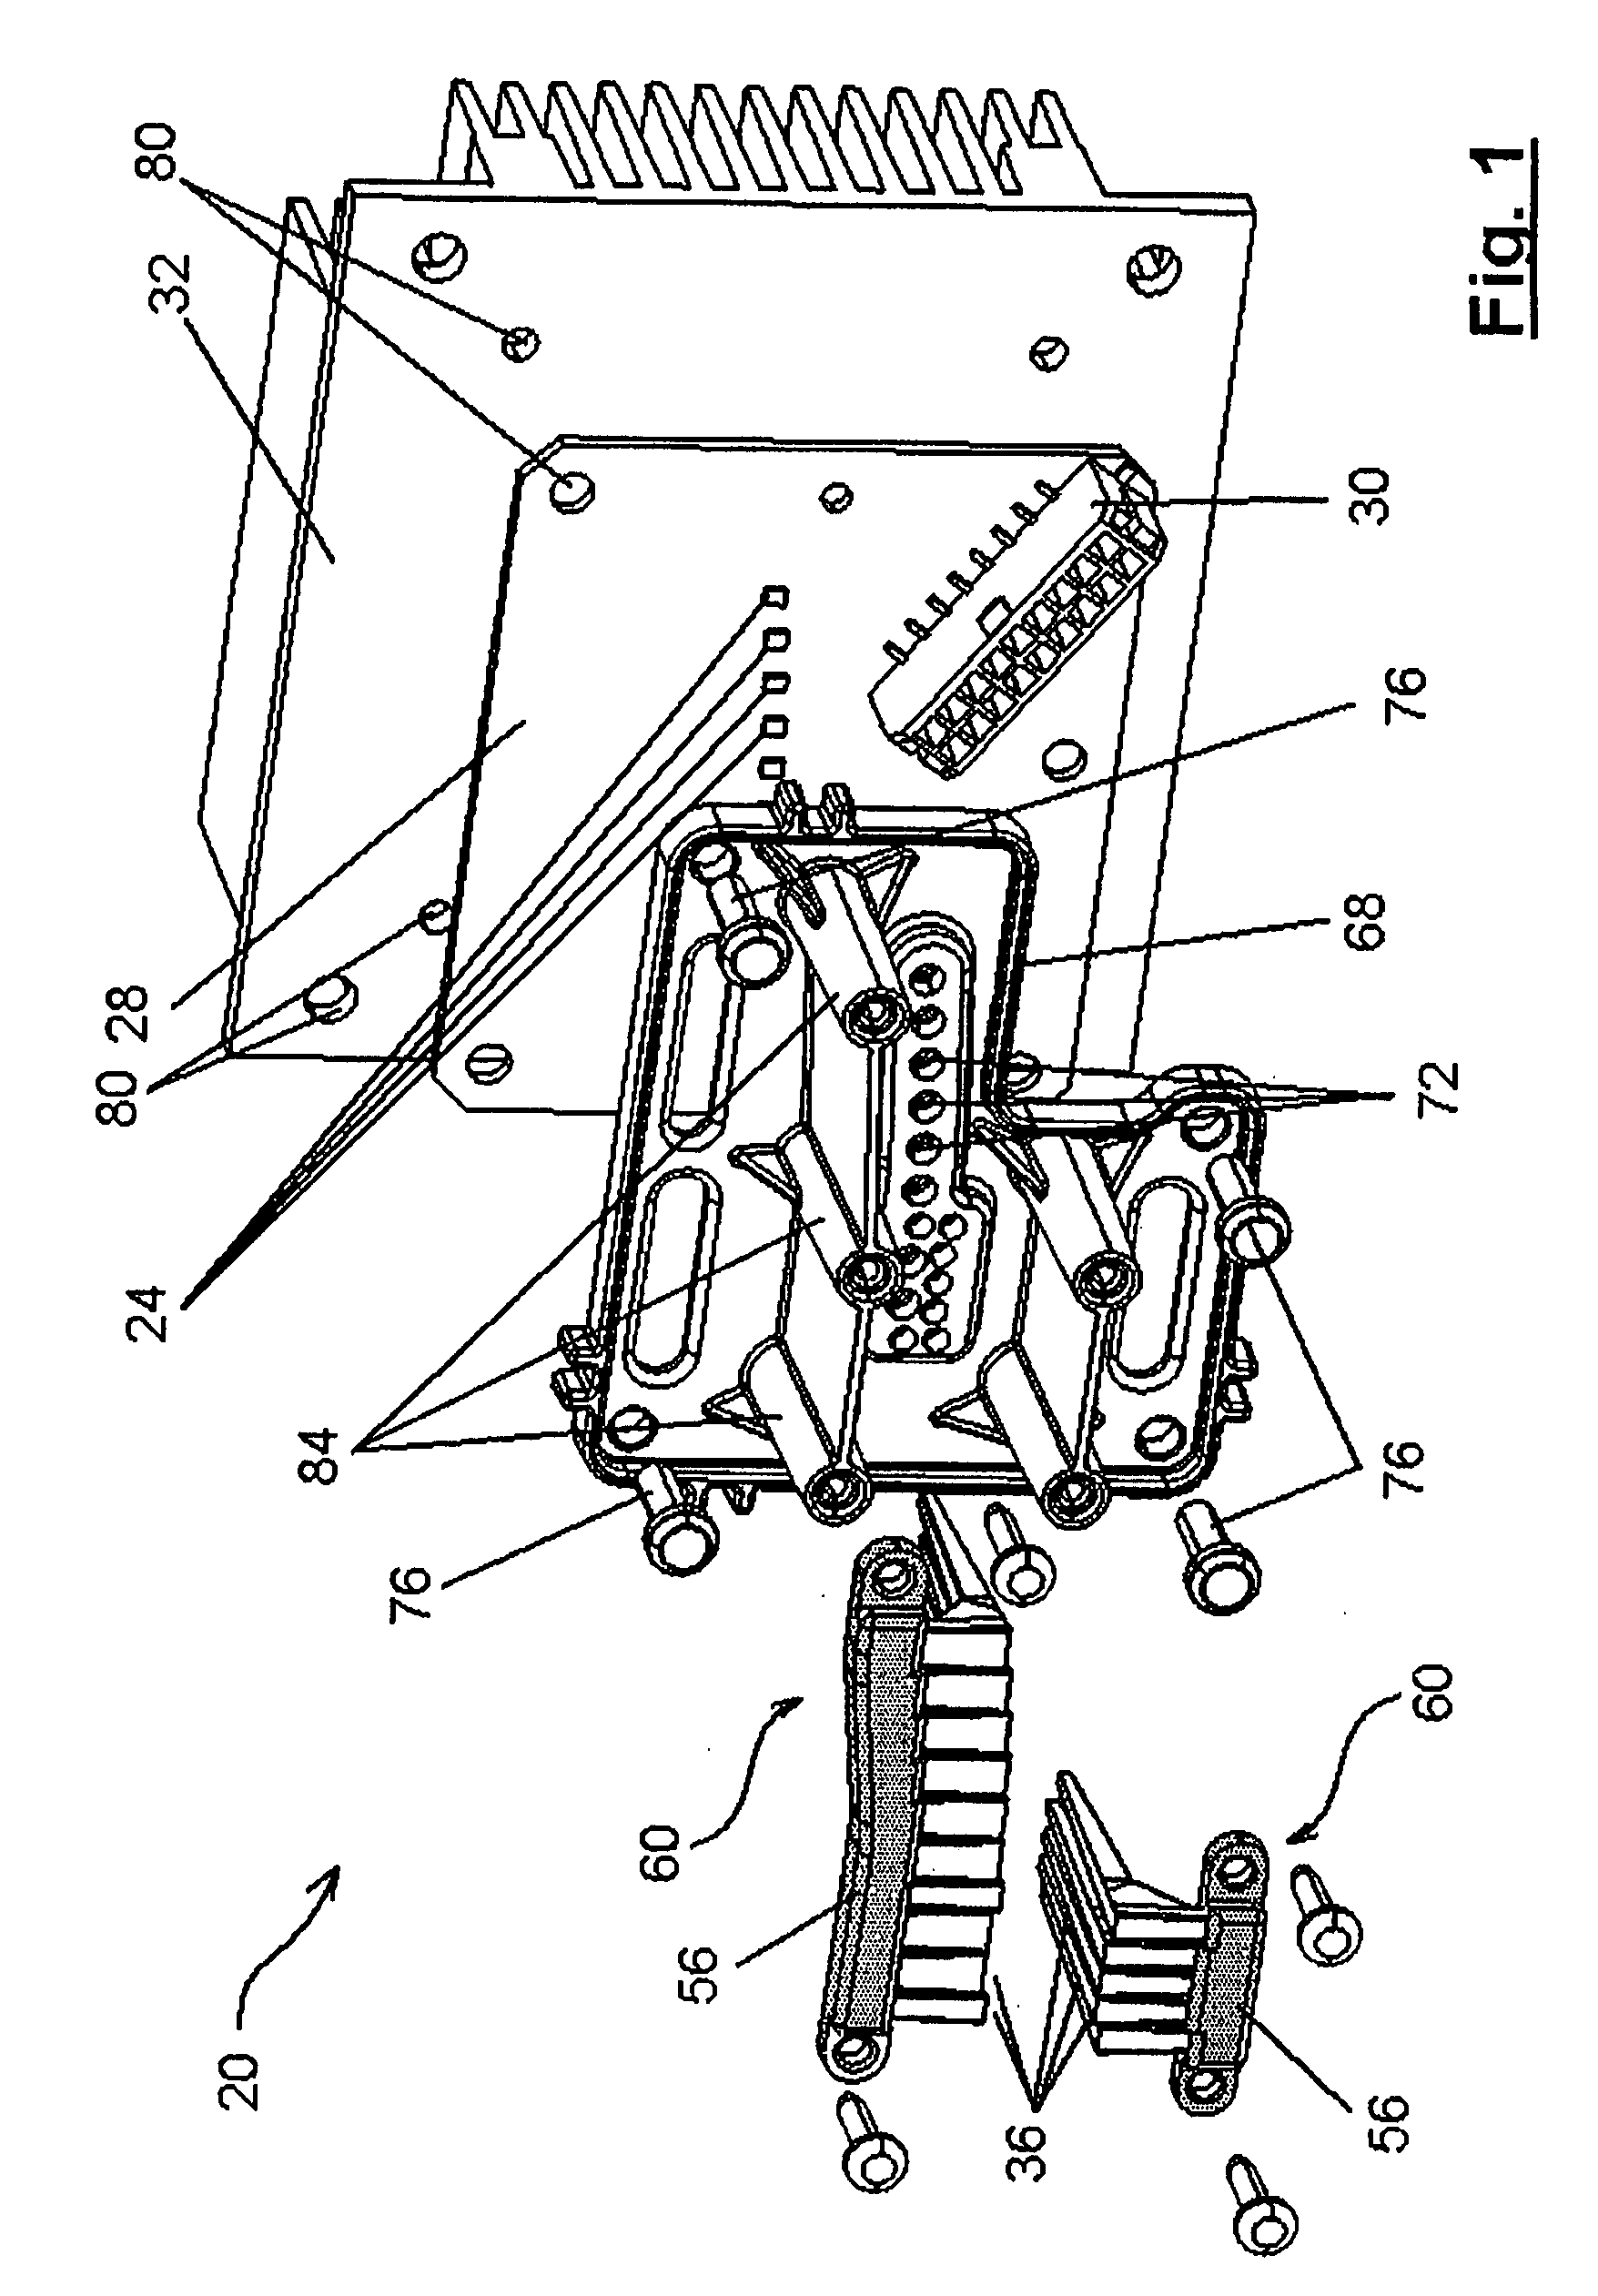 Semiconductor light engine using glass light pipes